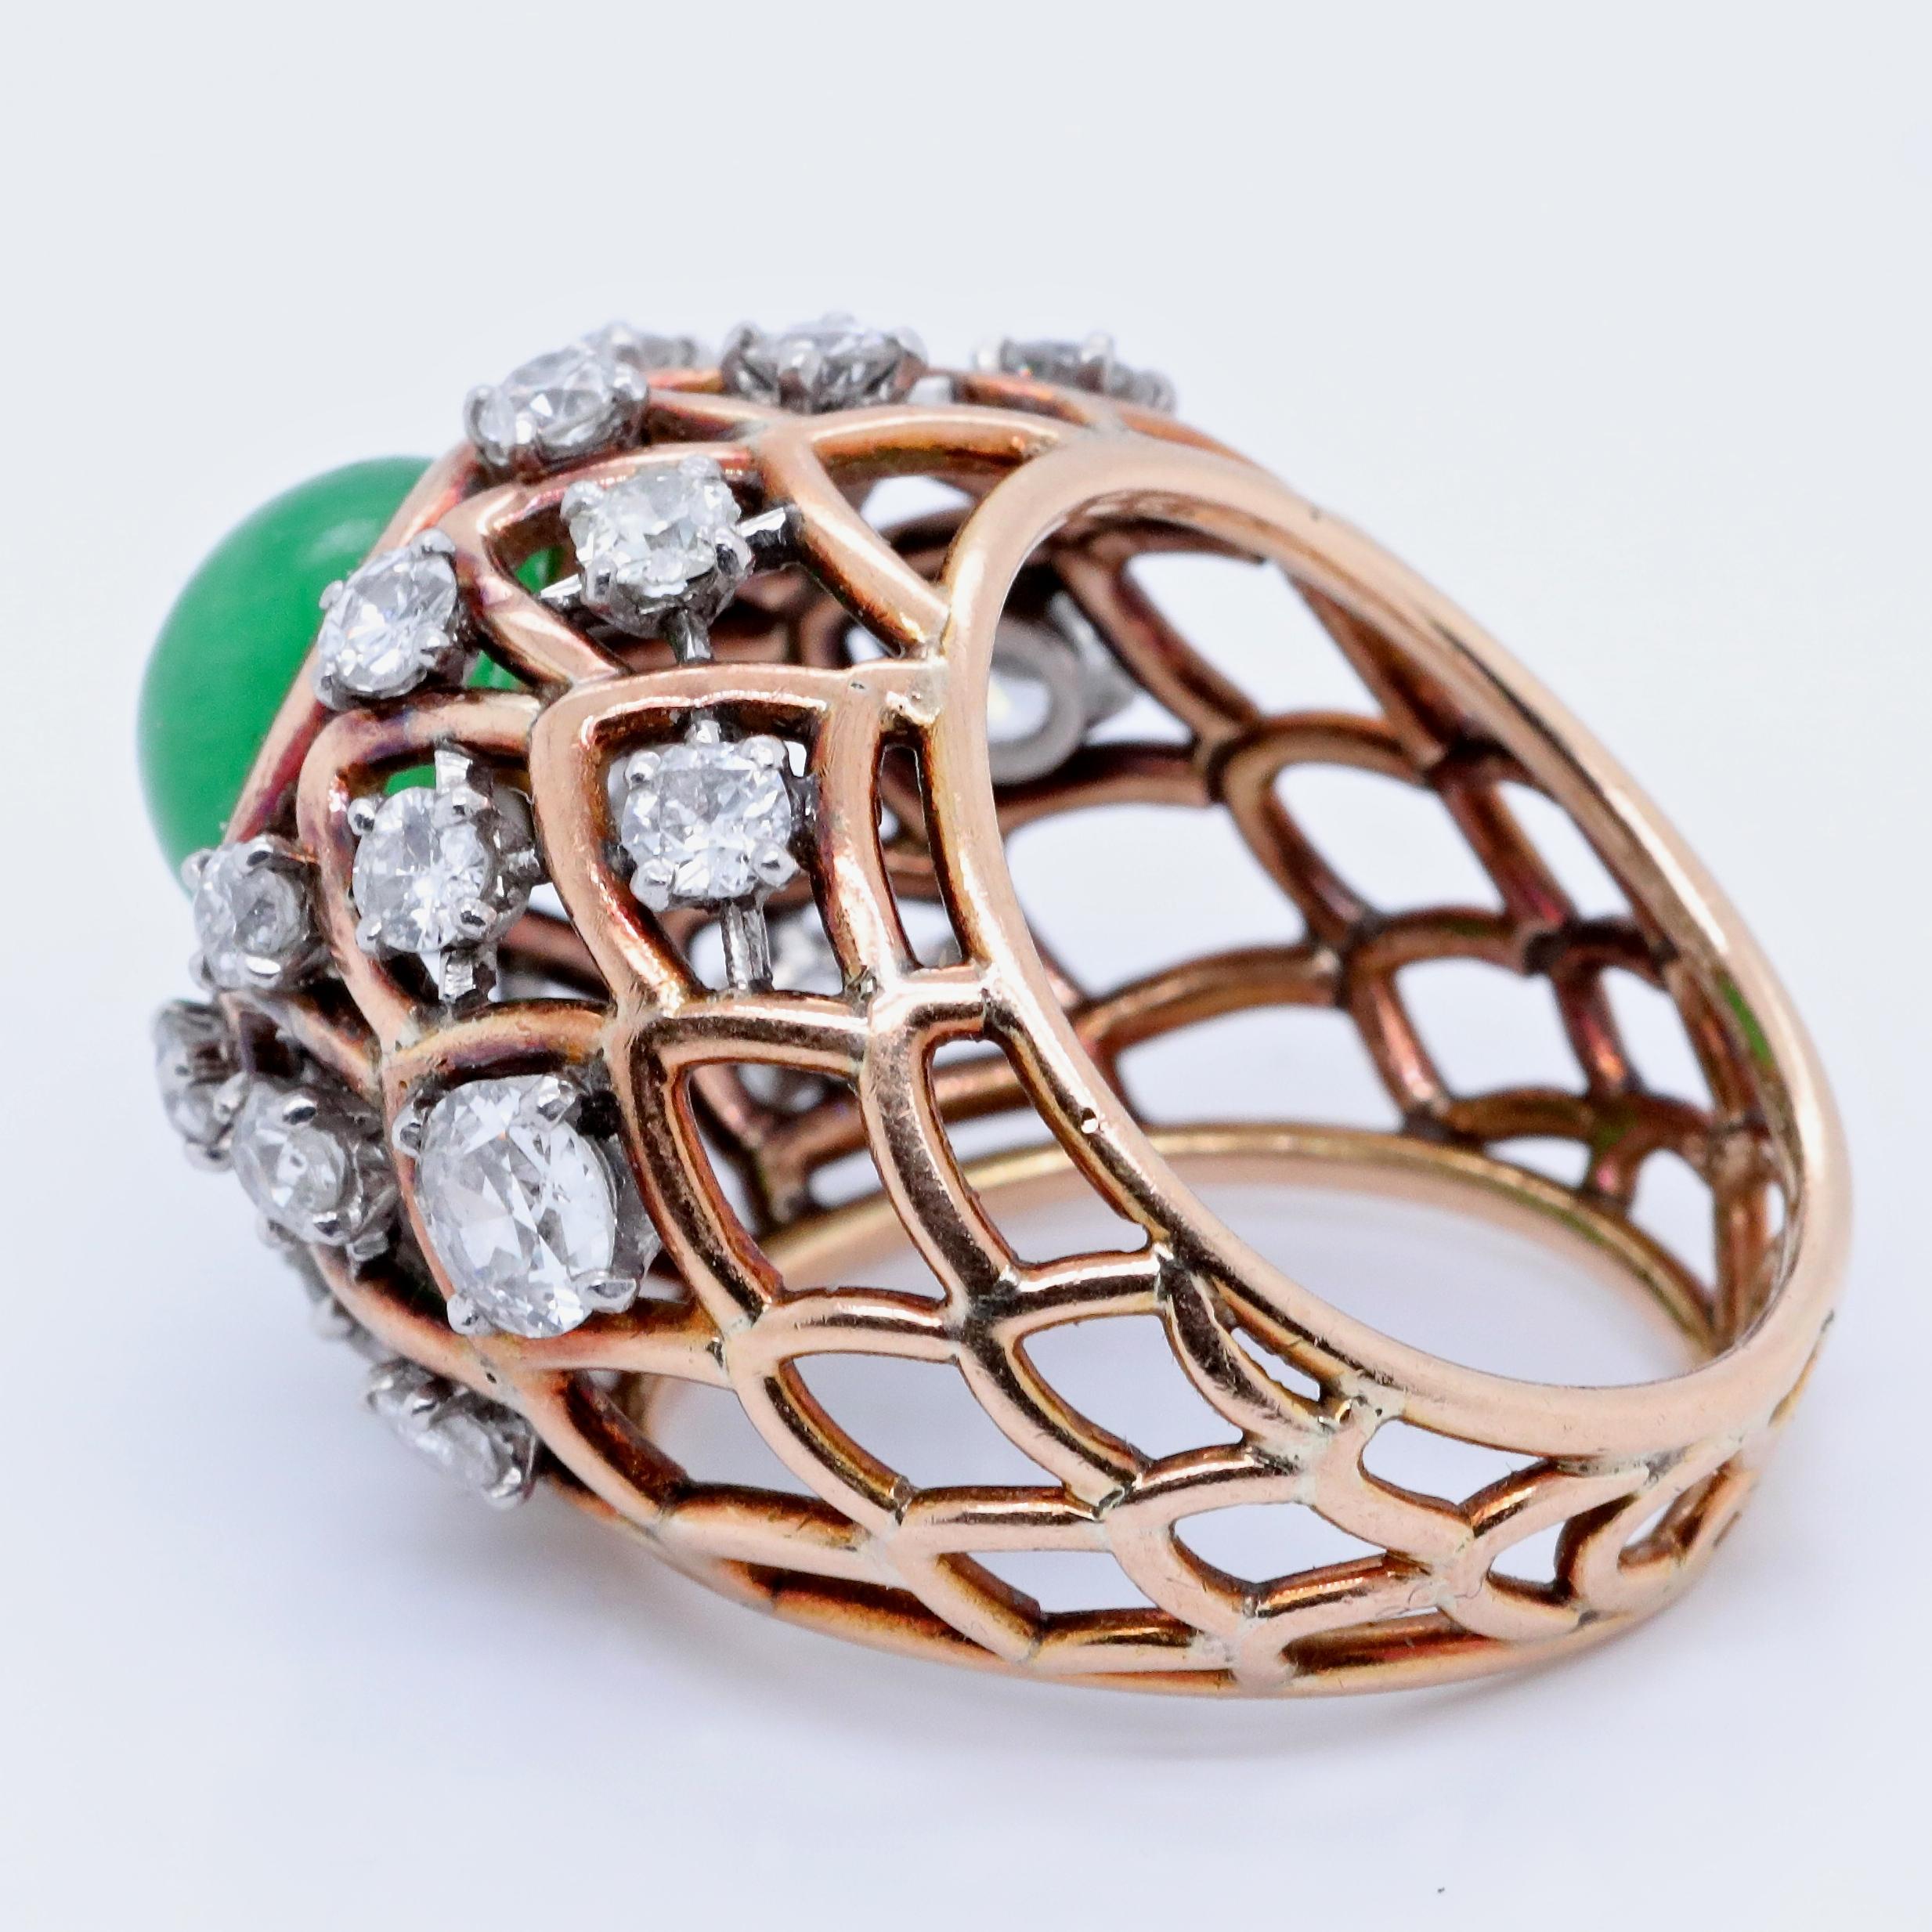 You are making a chic and confident statement as you walk into the room wearing this Vintage Boucheron Paris Diamond Jadeite 18k Gold Bombé Ring. One of a kind and desirable, this Boucheron ring features 22 Old European Cut diamonds, approximately